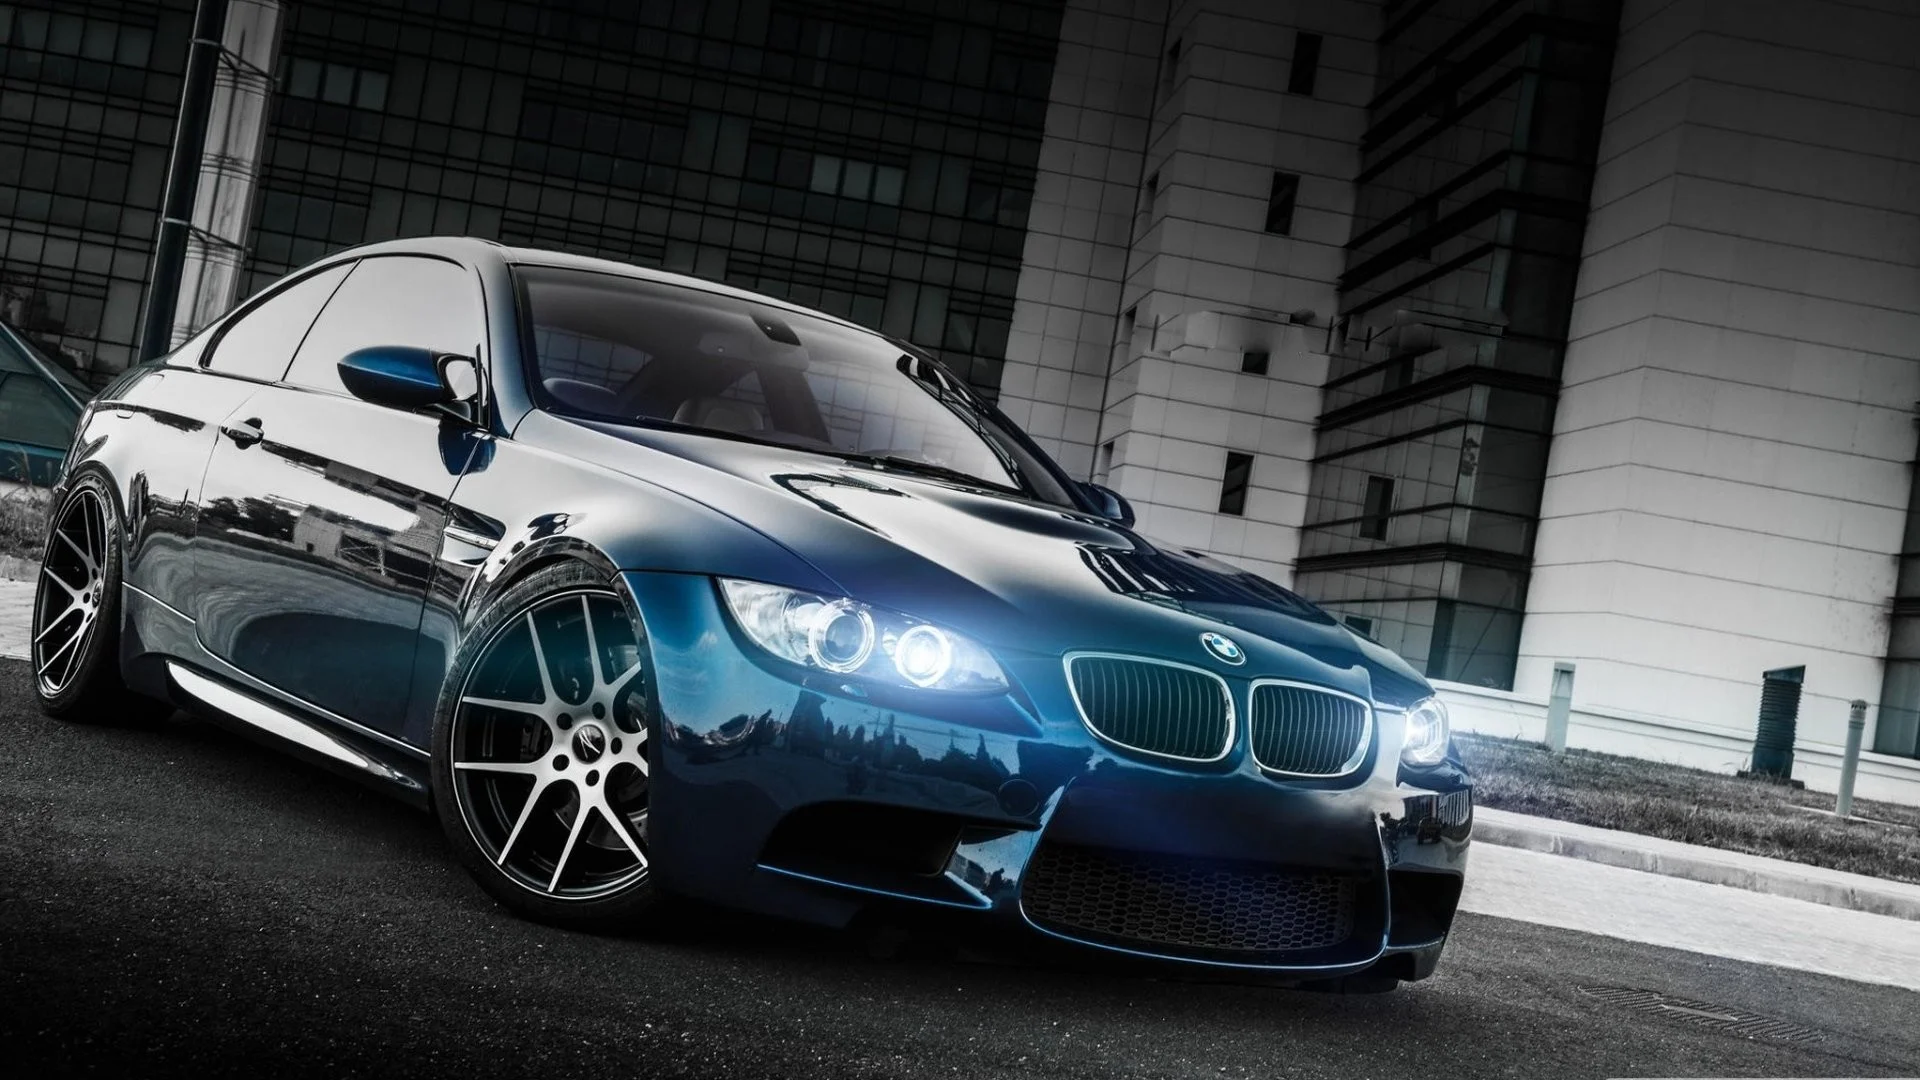 BMW Wallpapers High Quality BMW Backgrounds VDG